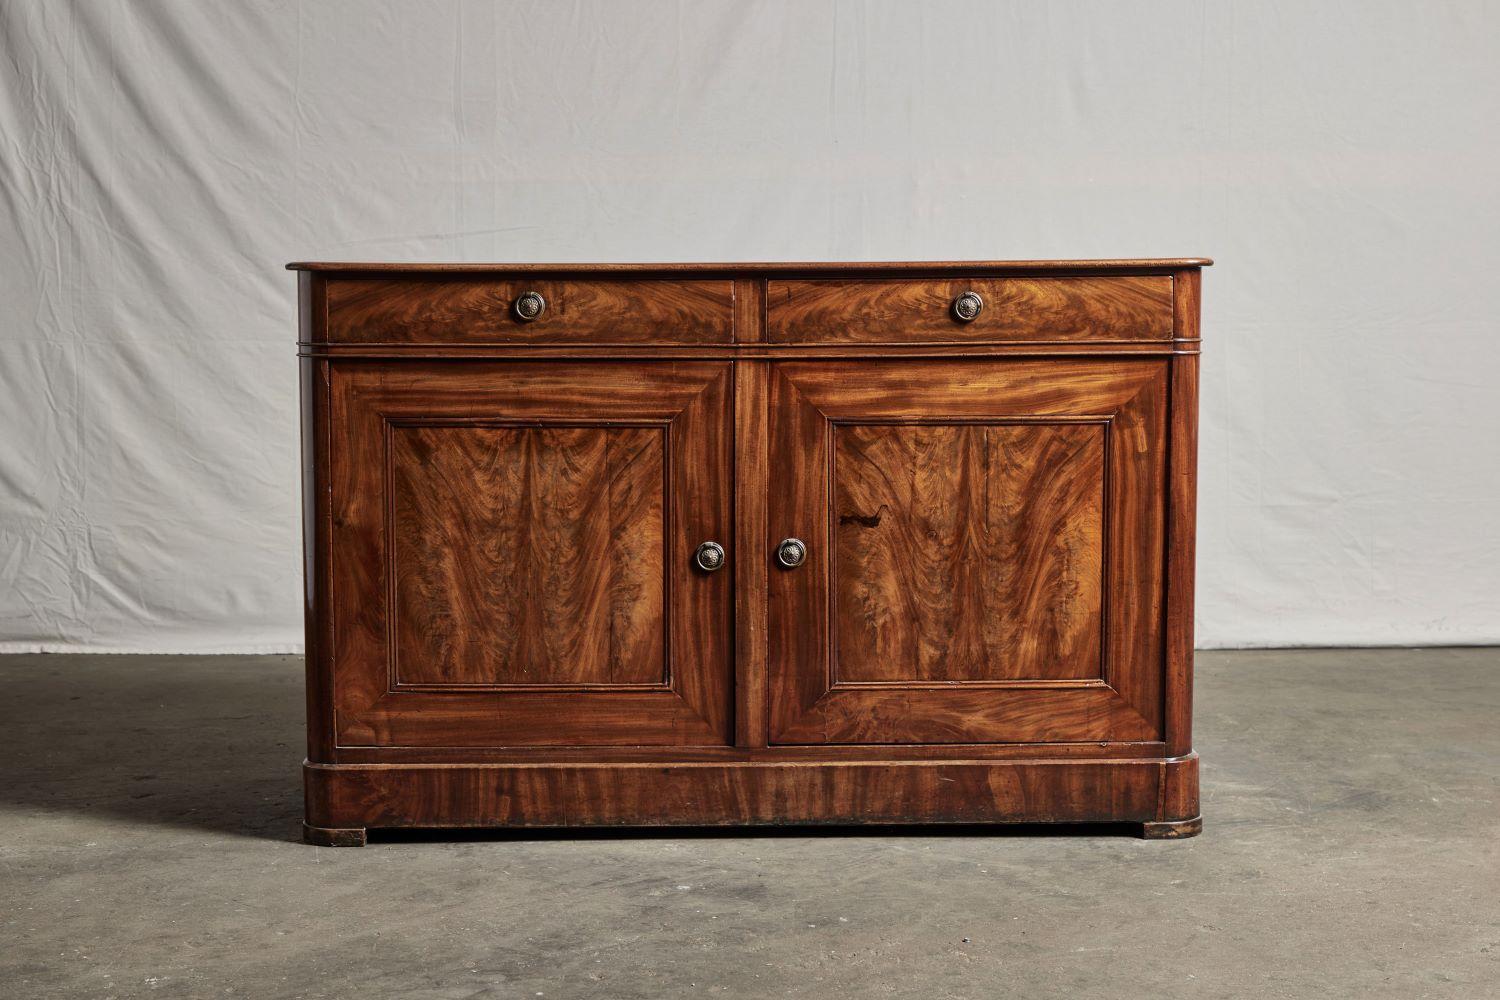 Late 19th century sideboard made of fine quality Honduras mahogany. It features a finely figured top and two drawers above two paneled drawers.